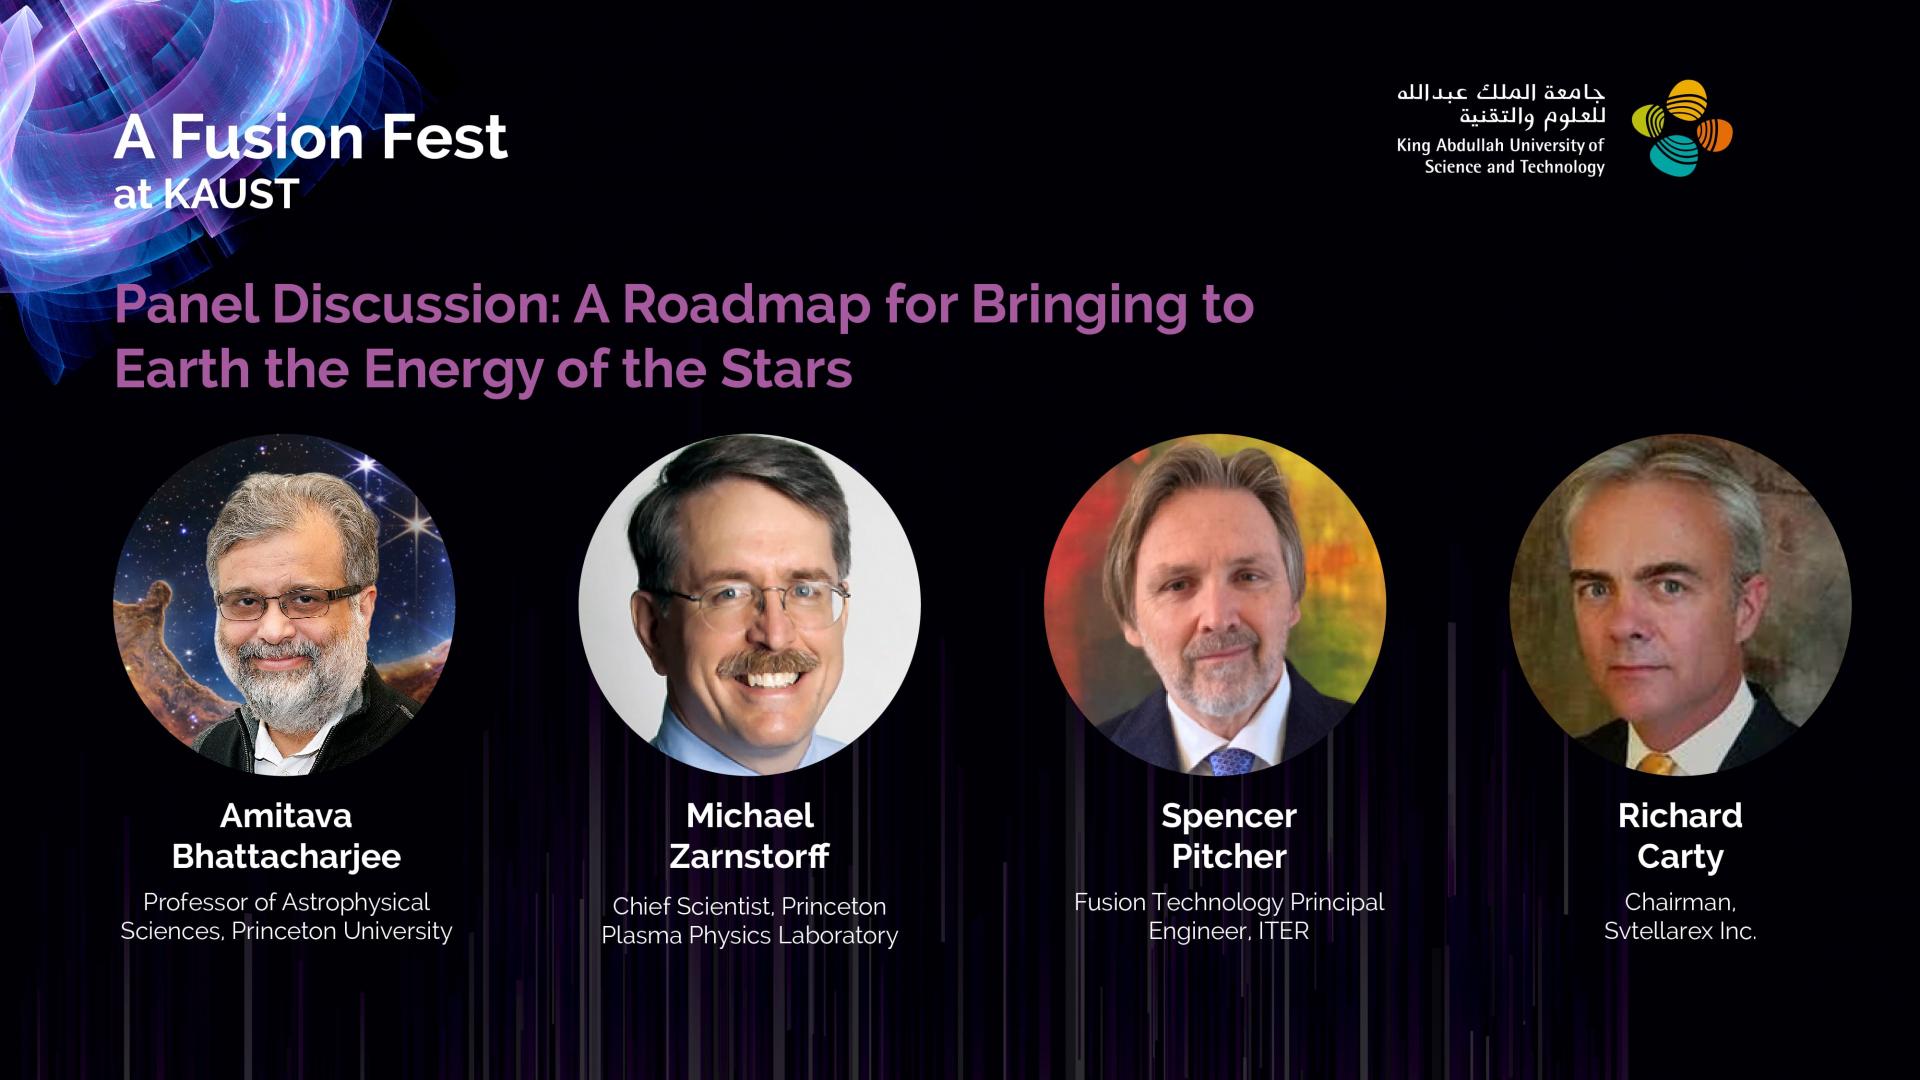 KAUST-CEMSE-AMCS-KAUST-FUSION-FEST-Panel-Discussion-A-Roadmap-Bringing-to-Earth-the-Energy-of-the-Stars-Bhattacharjee-Zarnstorff